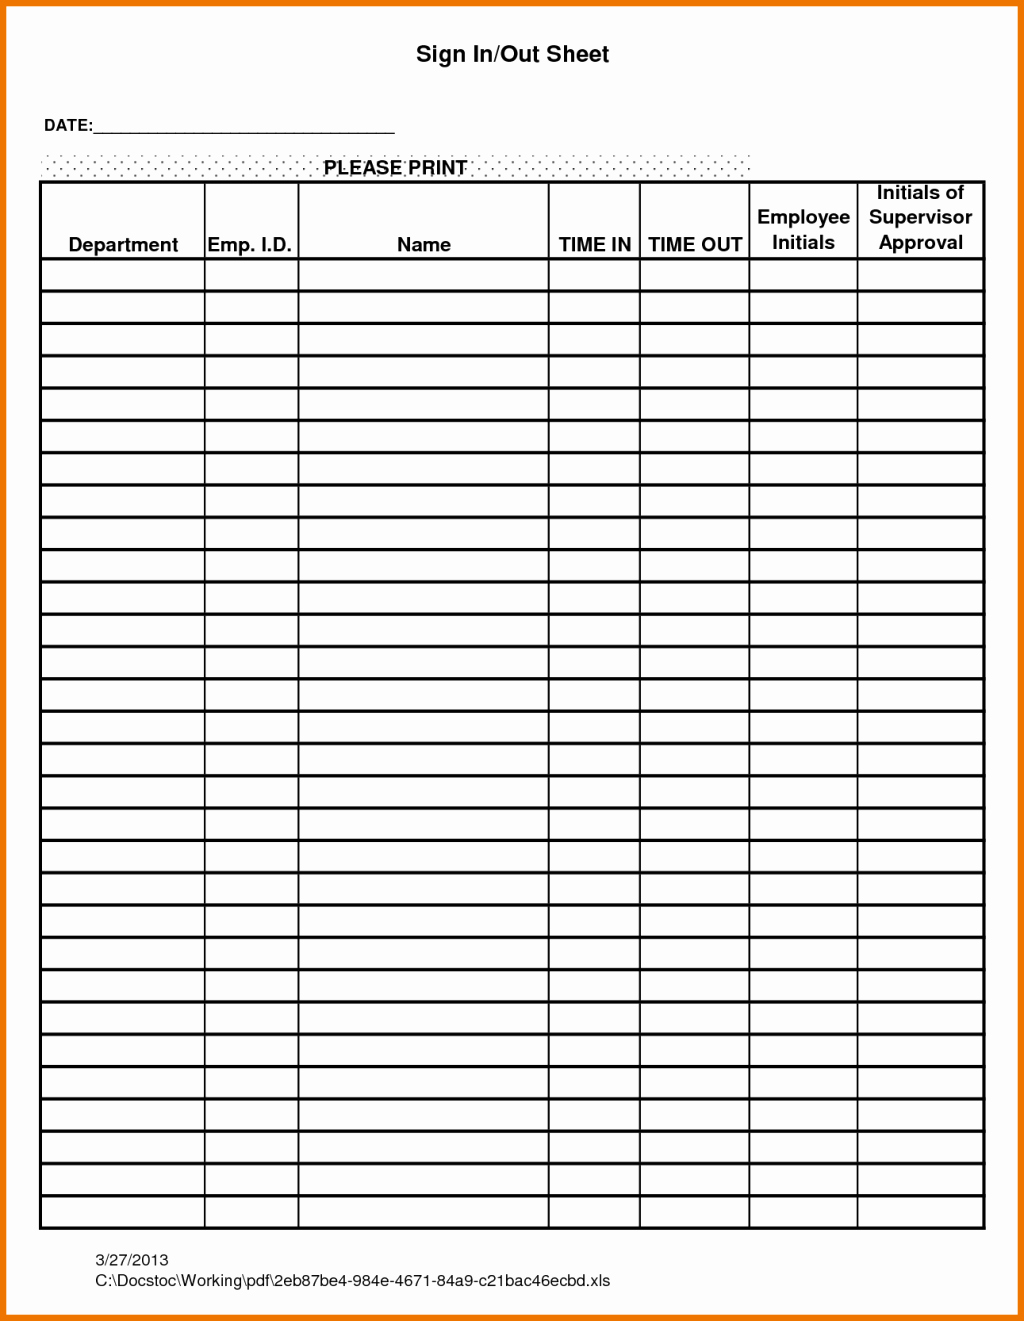 Employee Sign In Sheet Lovely Interesting Employee attendance Sign In Sheet with